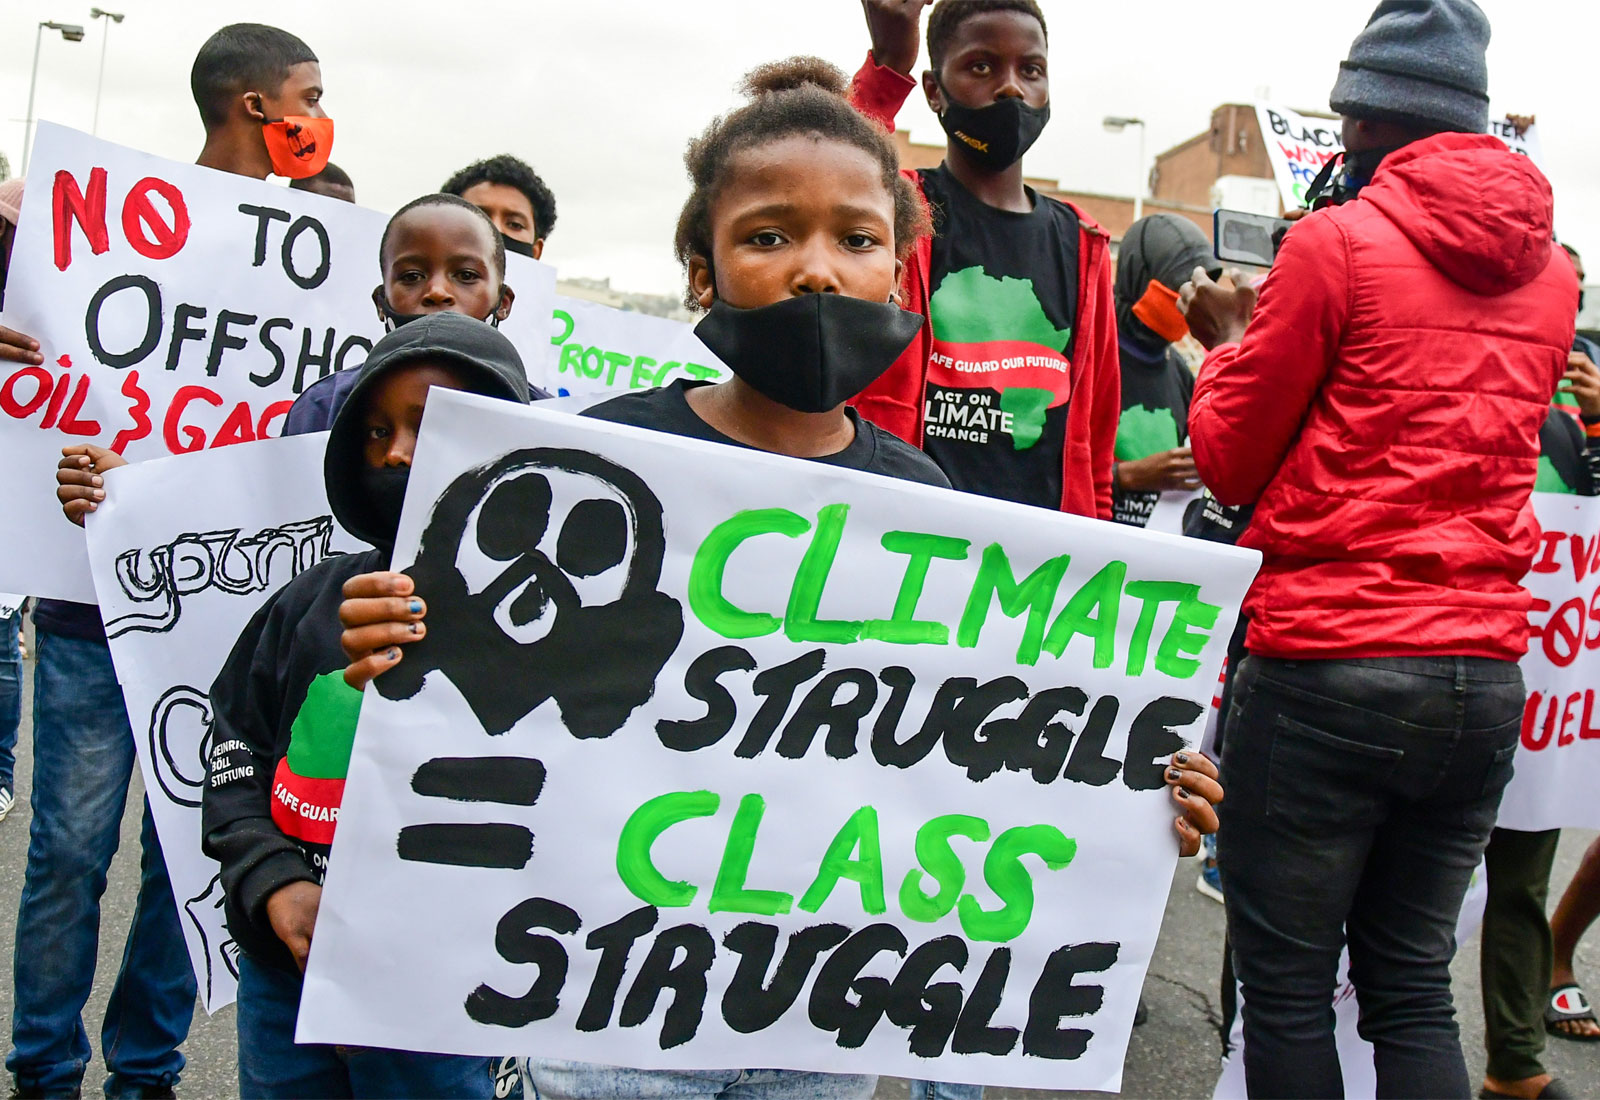 A young girl at a climate protest holding a sign that reads 